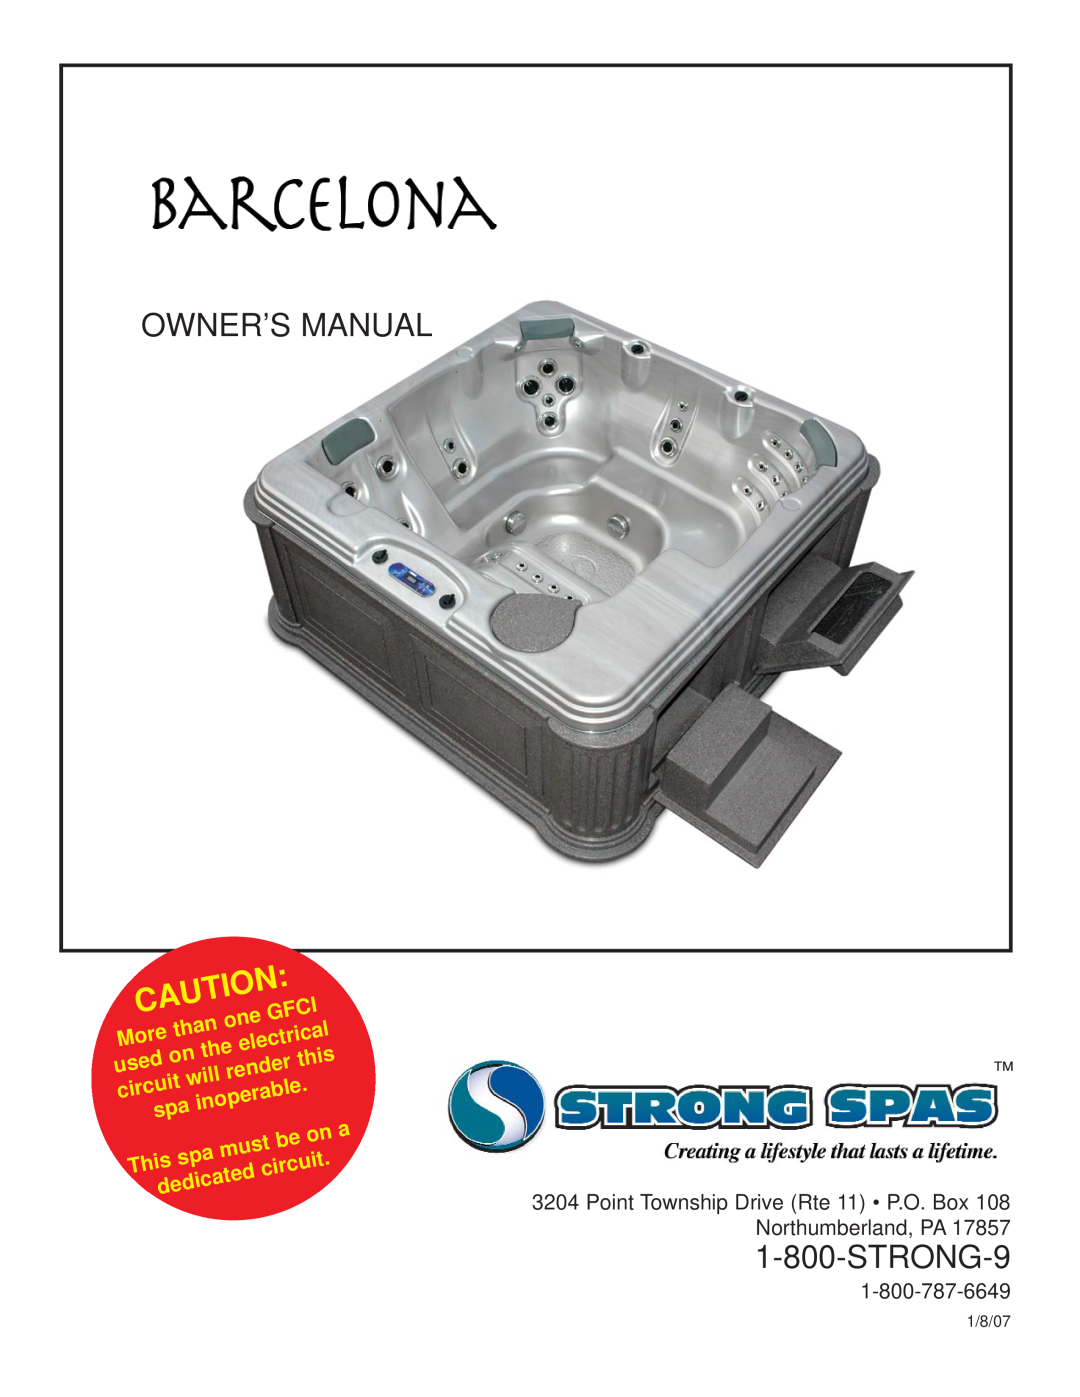 Strong Pools and Spas Barcelona owner manual Owner’S Manual, STRONG-9, than, Gfci, More, electrical, used, this, render 